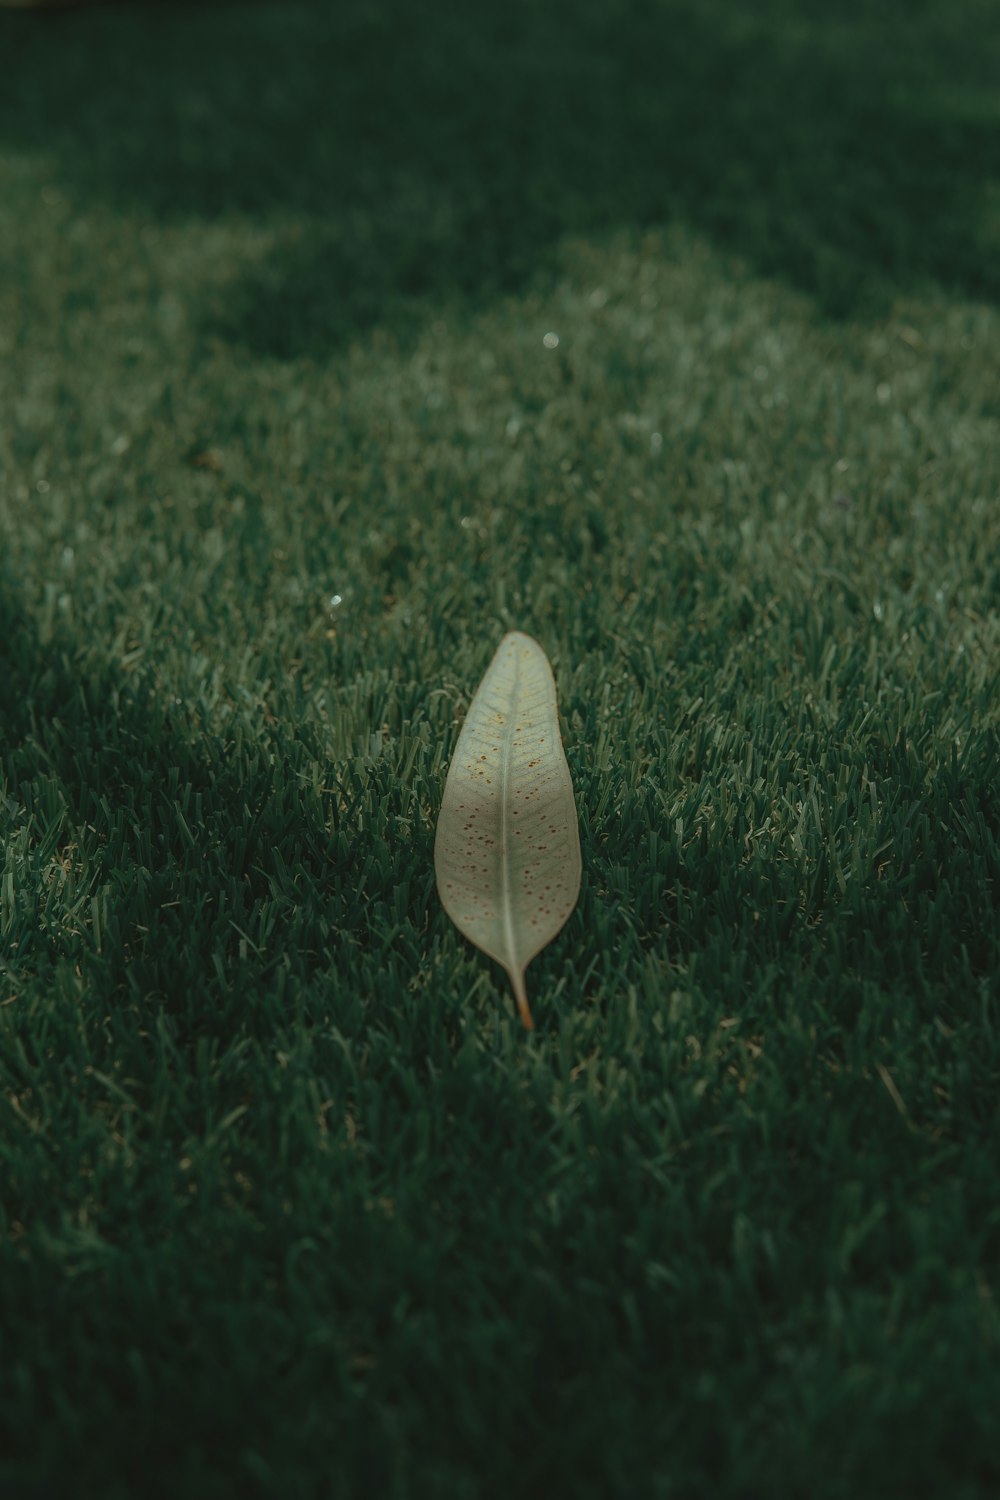 brown leaf on grass surface